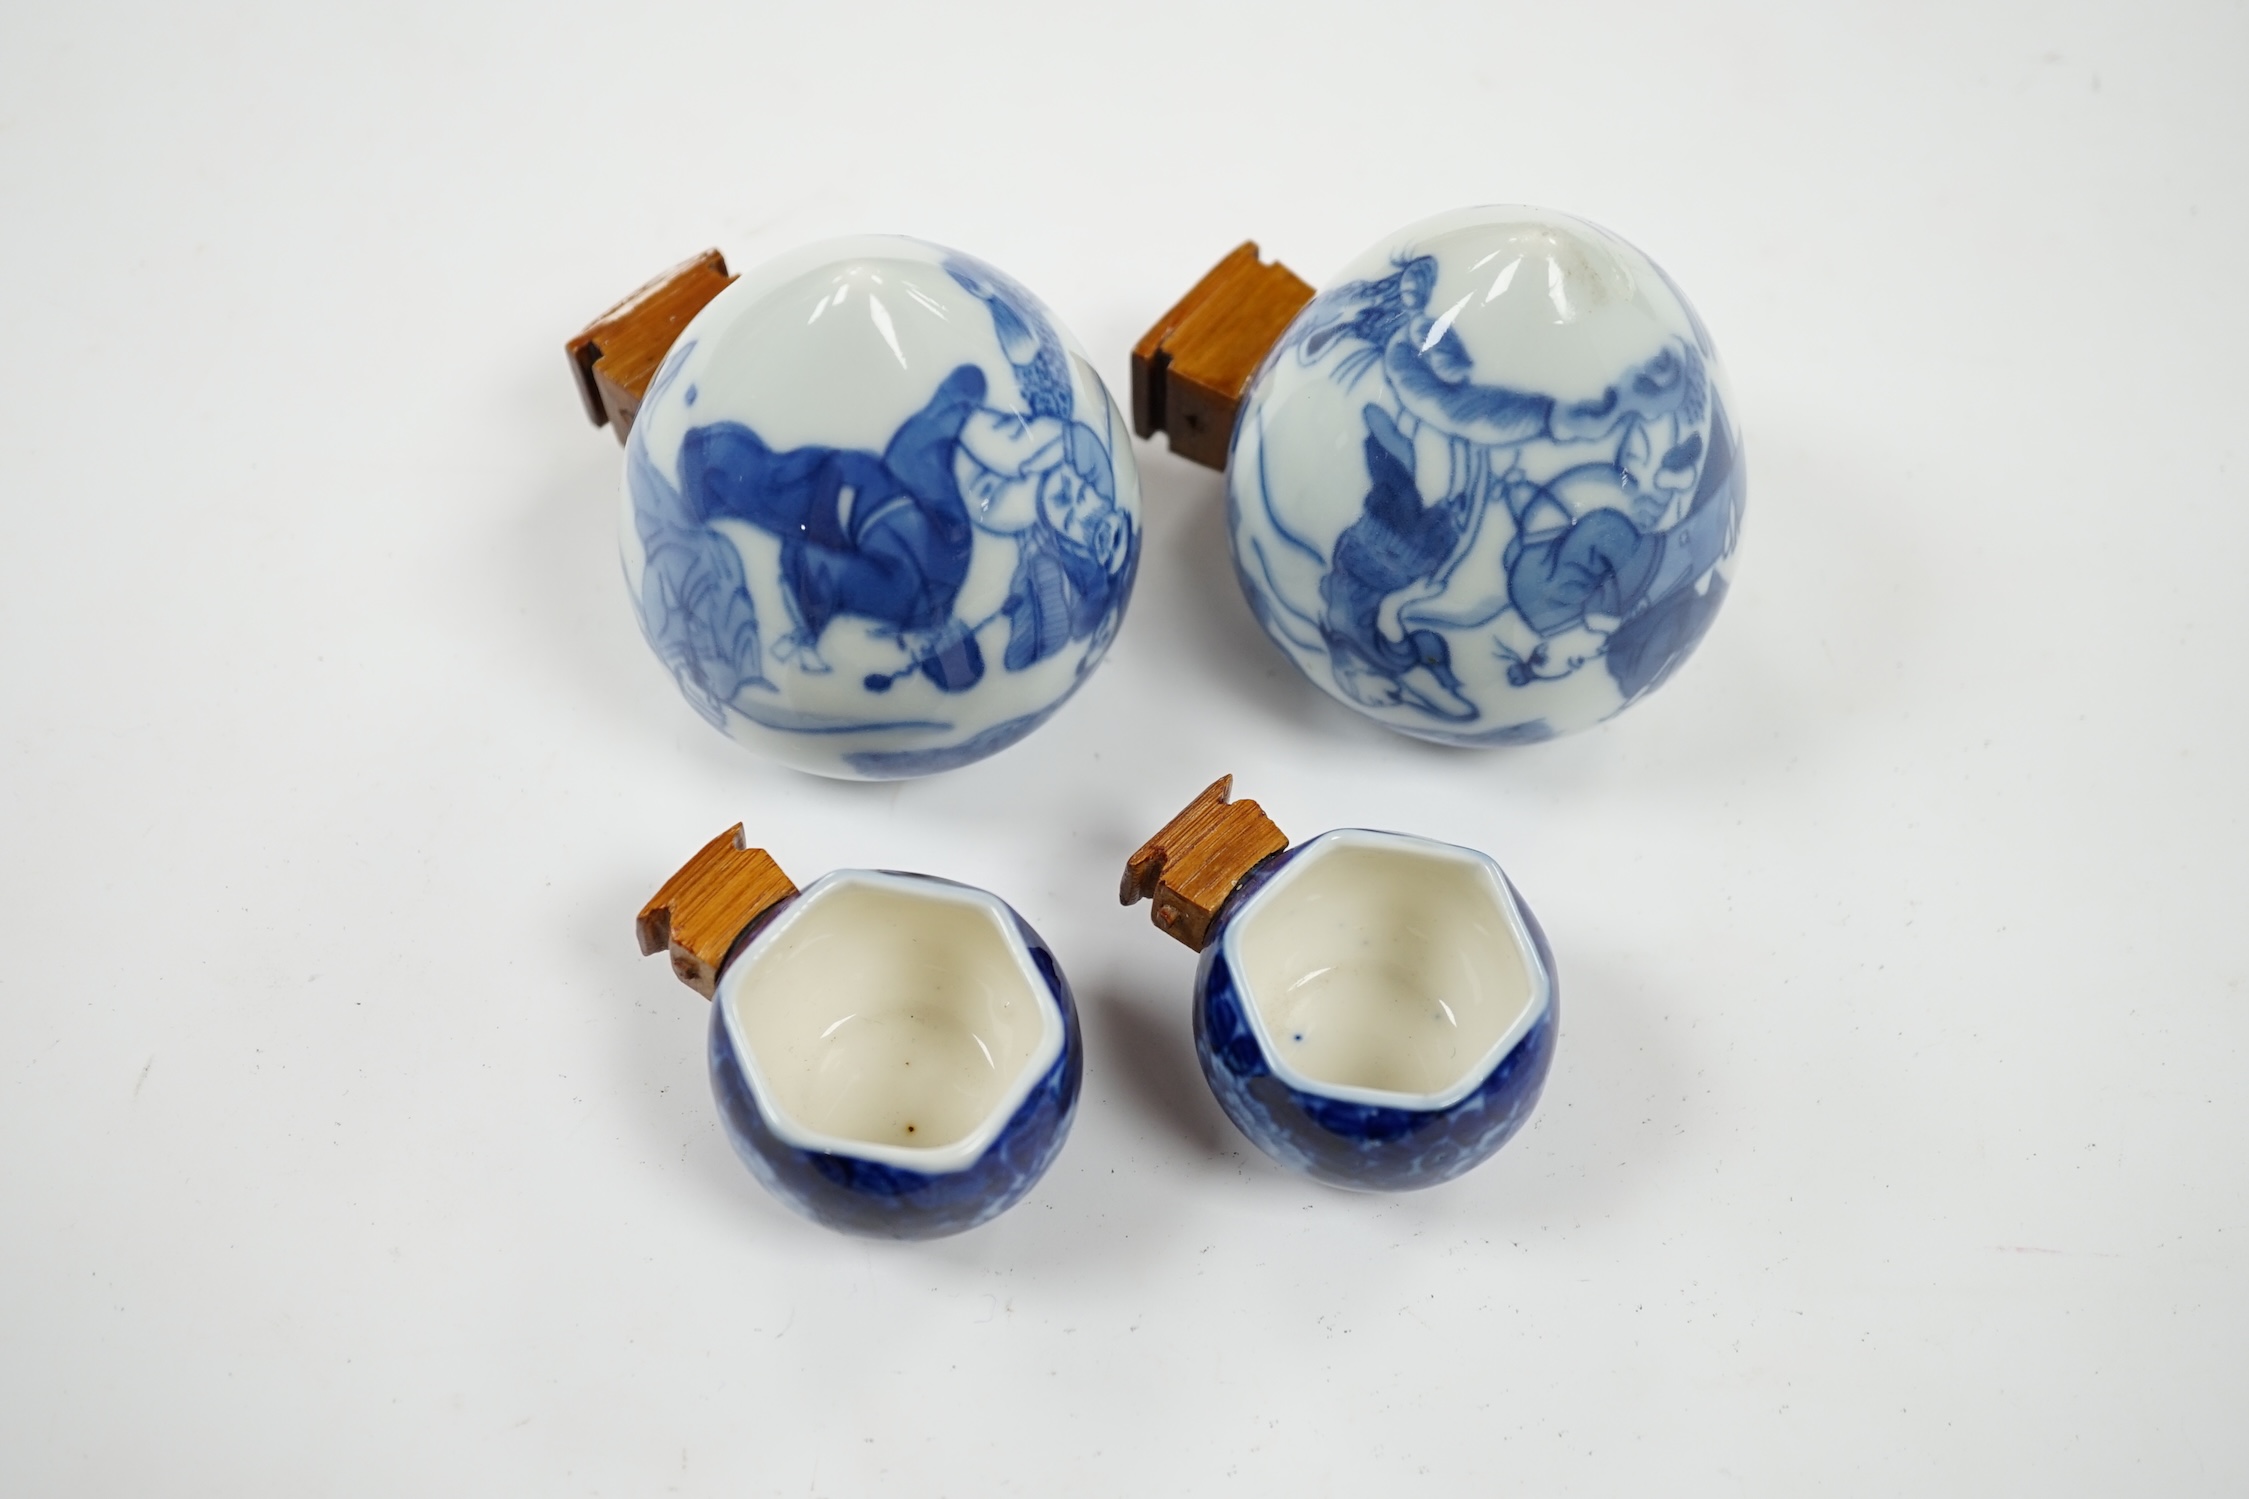 Four Chinese blue and white porcelain bird feeders, largest 7cm high. Condition - good, some glue residue